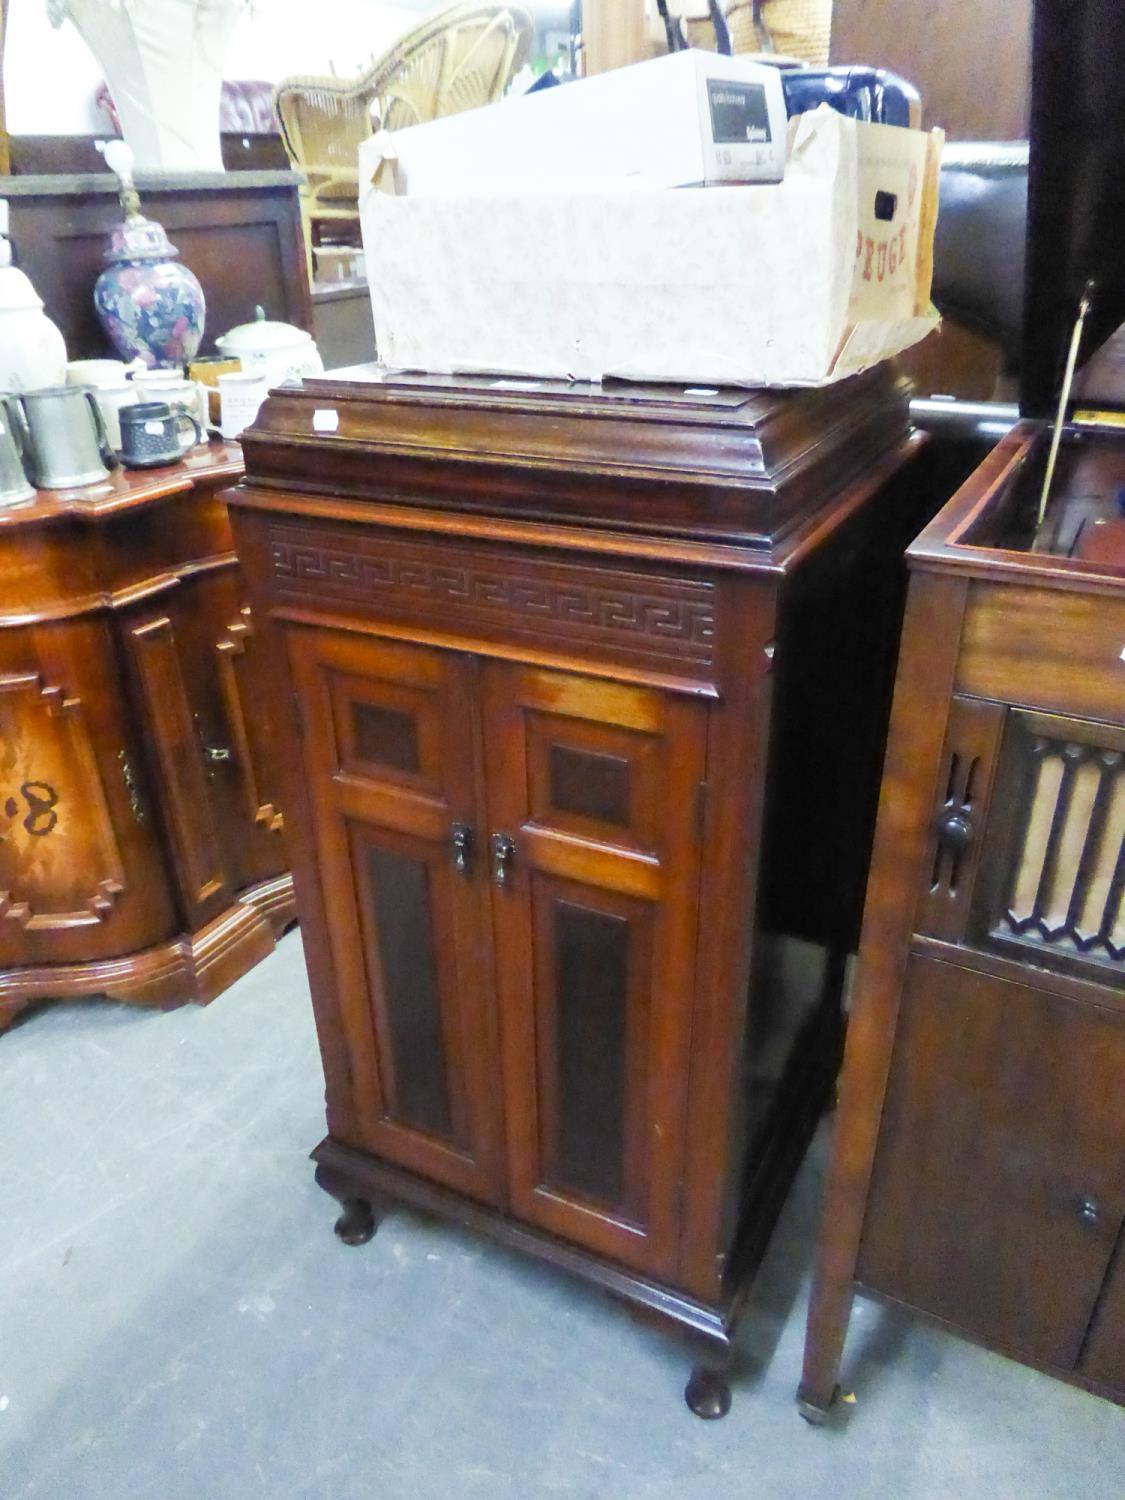 A MAHOGANY WIND-UP GRAMAPHONE CABINET ONLY (NO WORKS)